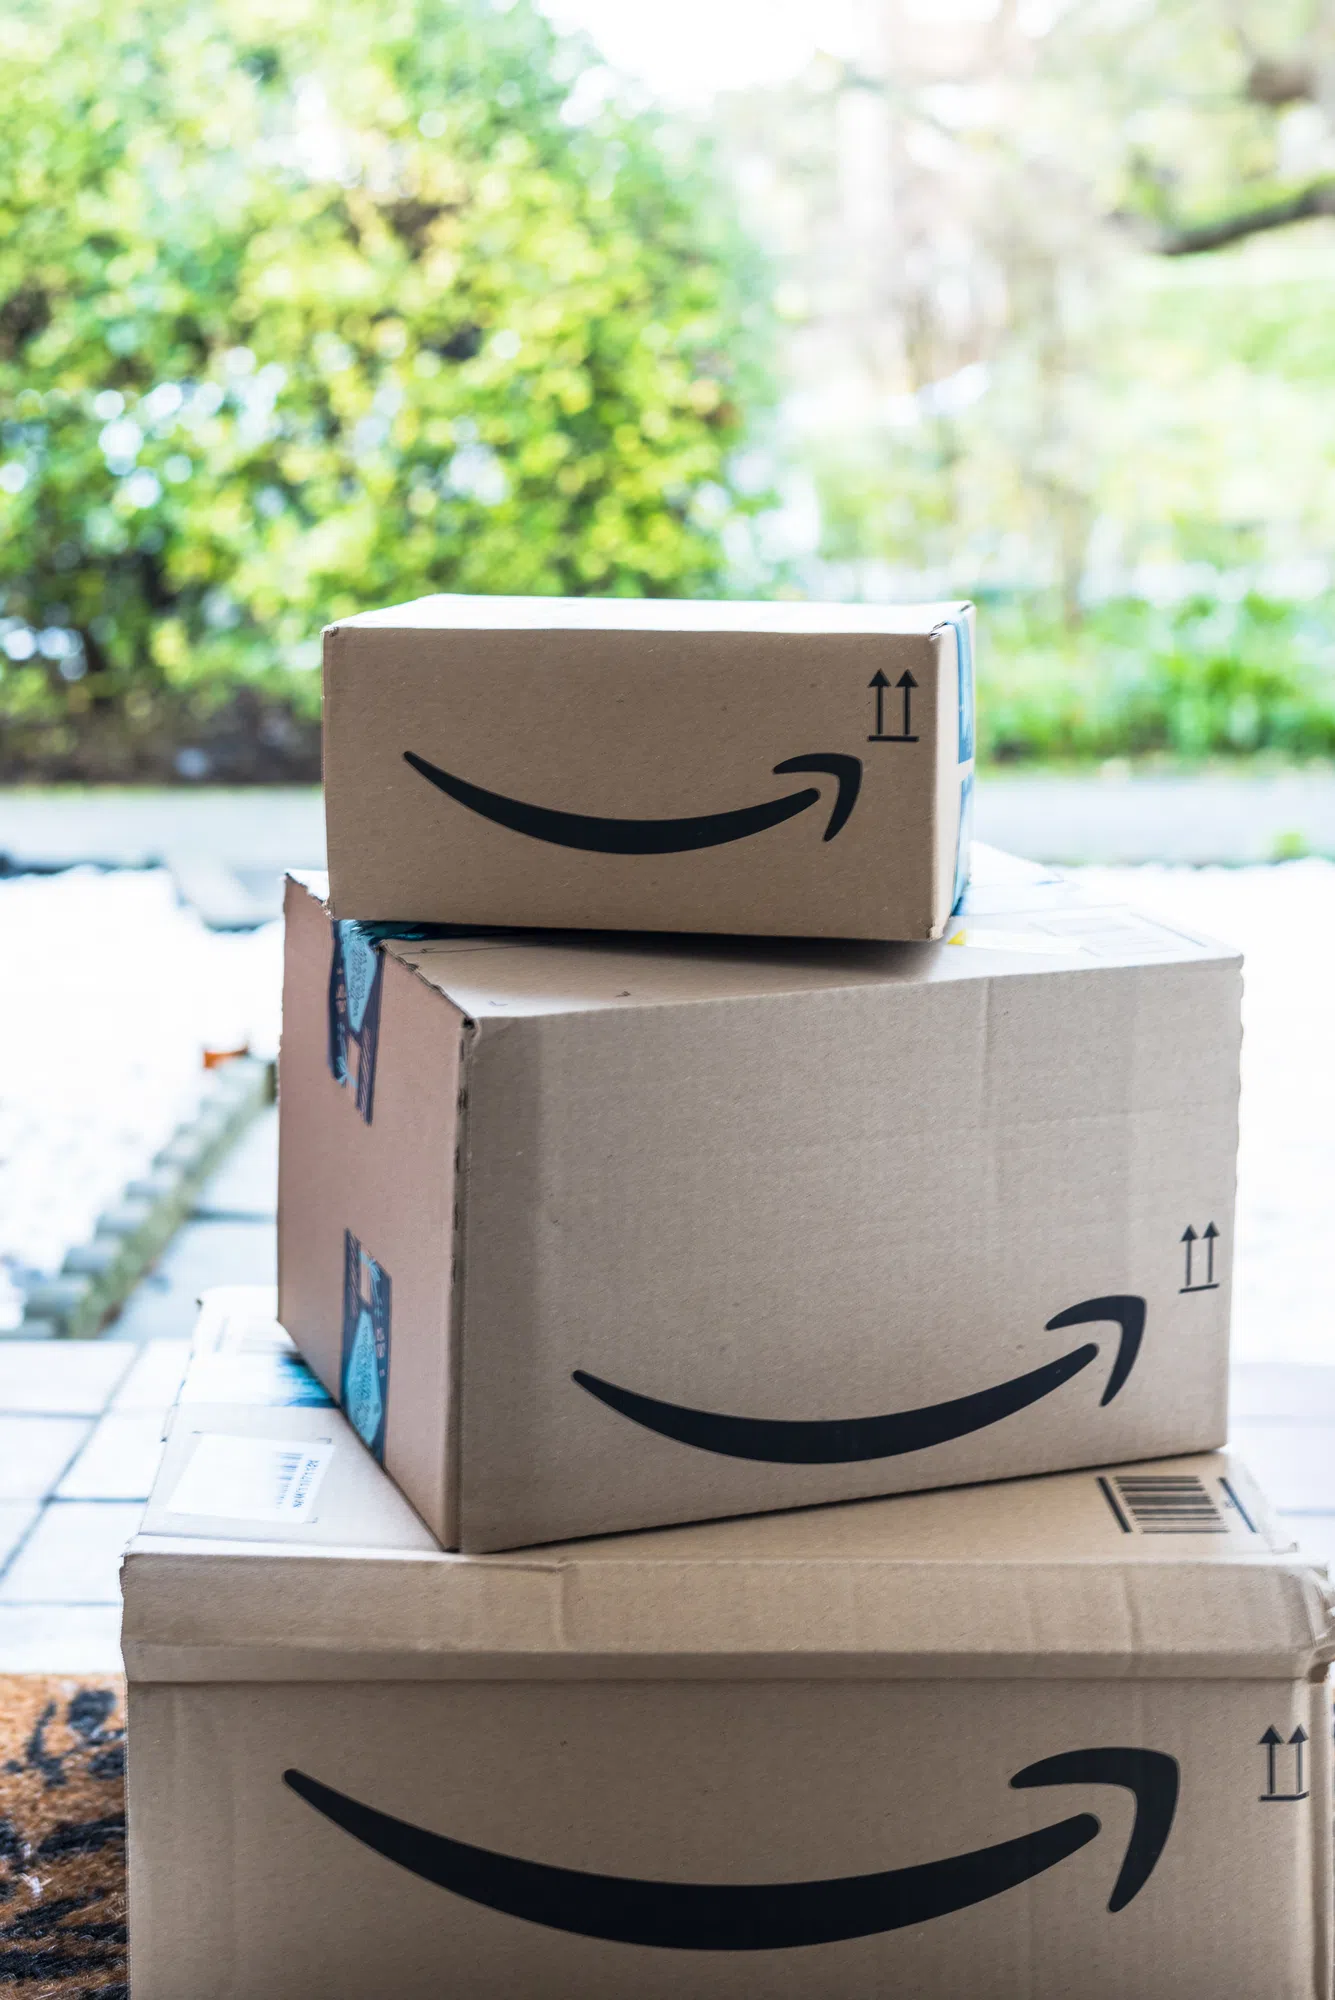 Amazon returns made easier in Canada